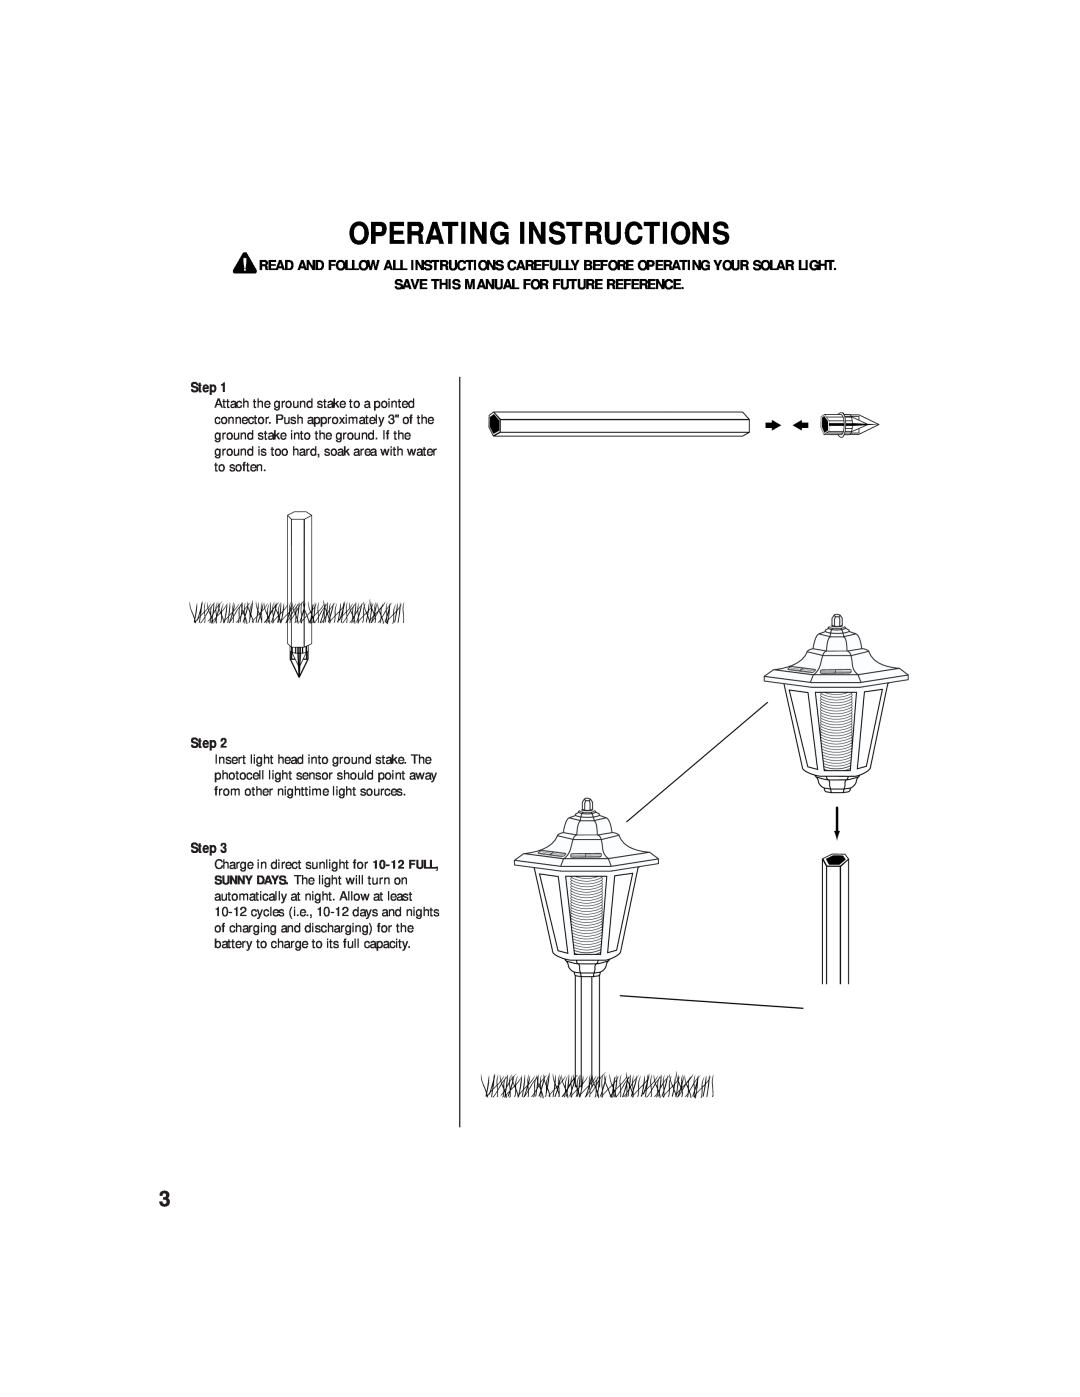 Brinkmann Solar Powered L.E.D. Garden Accent Light SAVE THIS MANUAL FOR FUTURE REFERENCE Step, Operating Instructions 